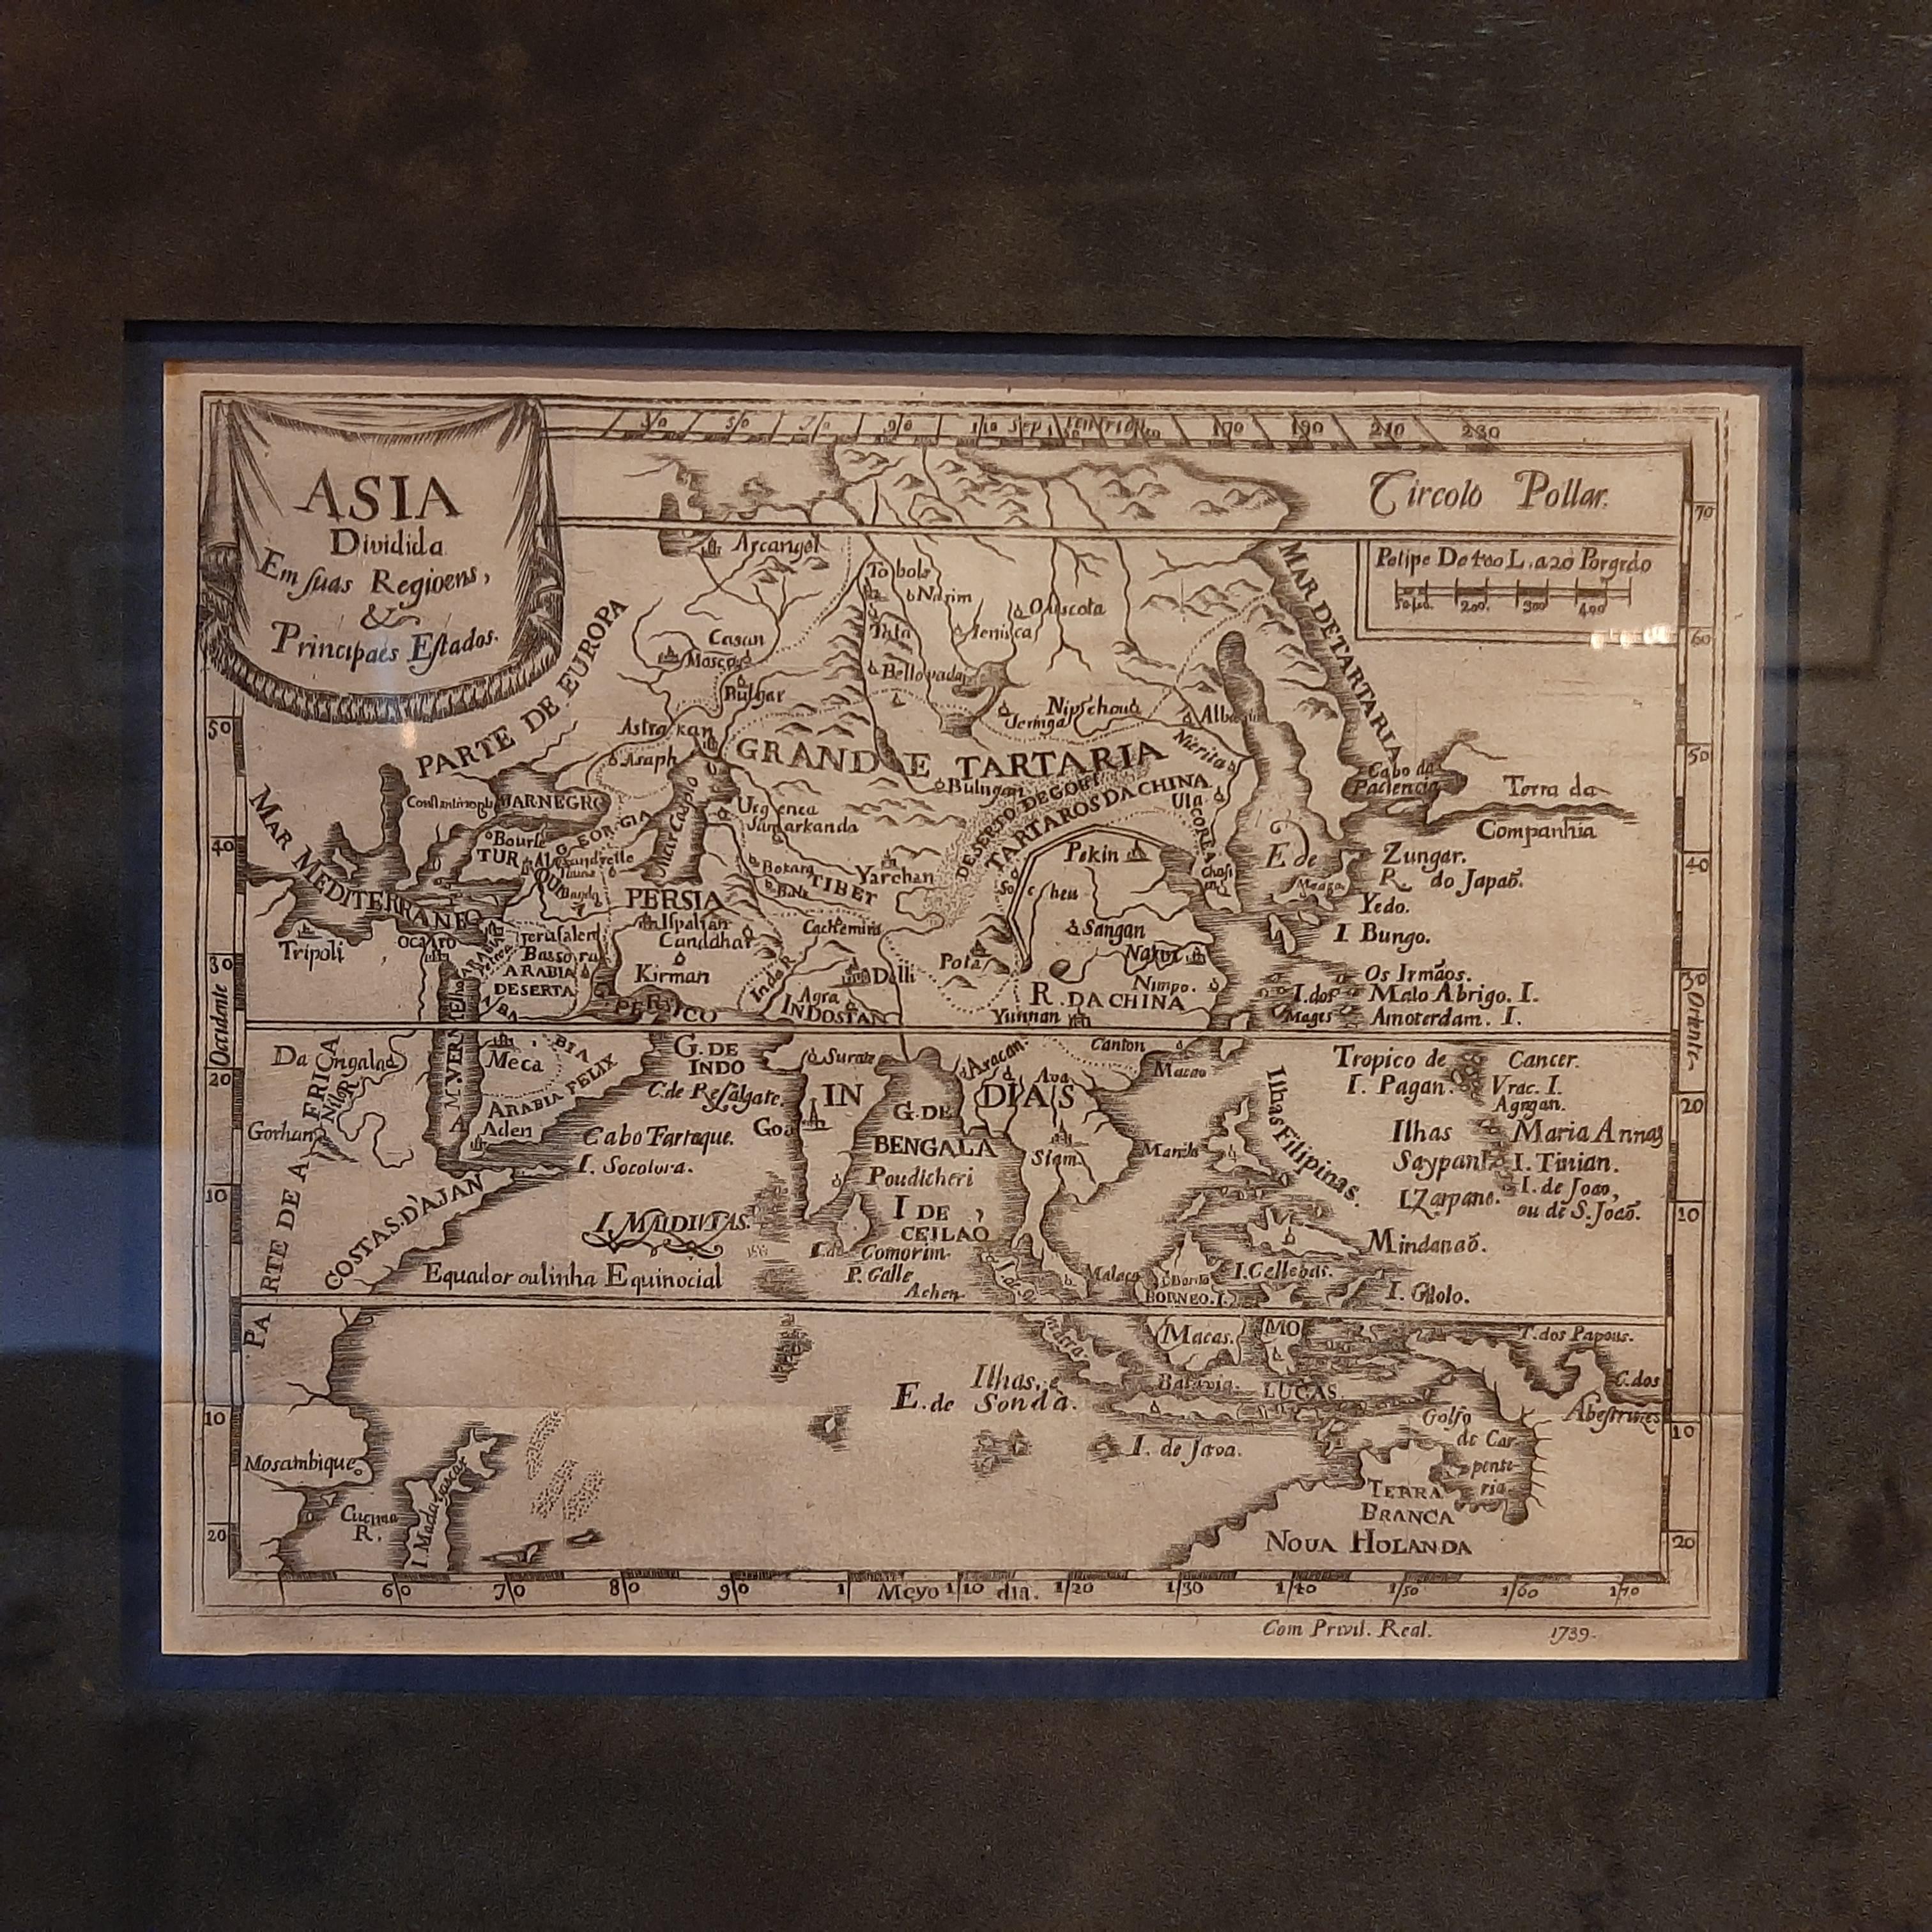 Antique map titled 'Asia Dividida em suas Regioens & Principaes Estados'. Rare and uncommon map of Asia. Signed '1739'. Source unknown, to be determined.

Frame included. We carefully pack our framed items to ensure safe shipping.